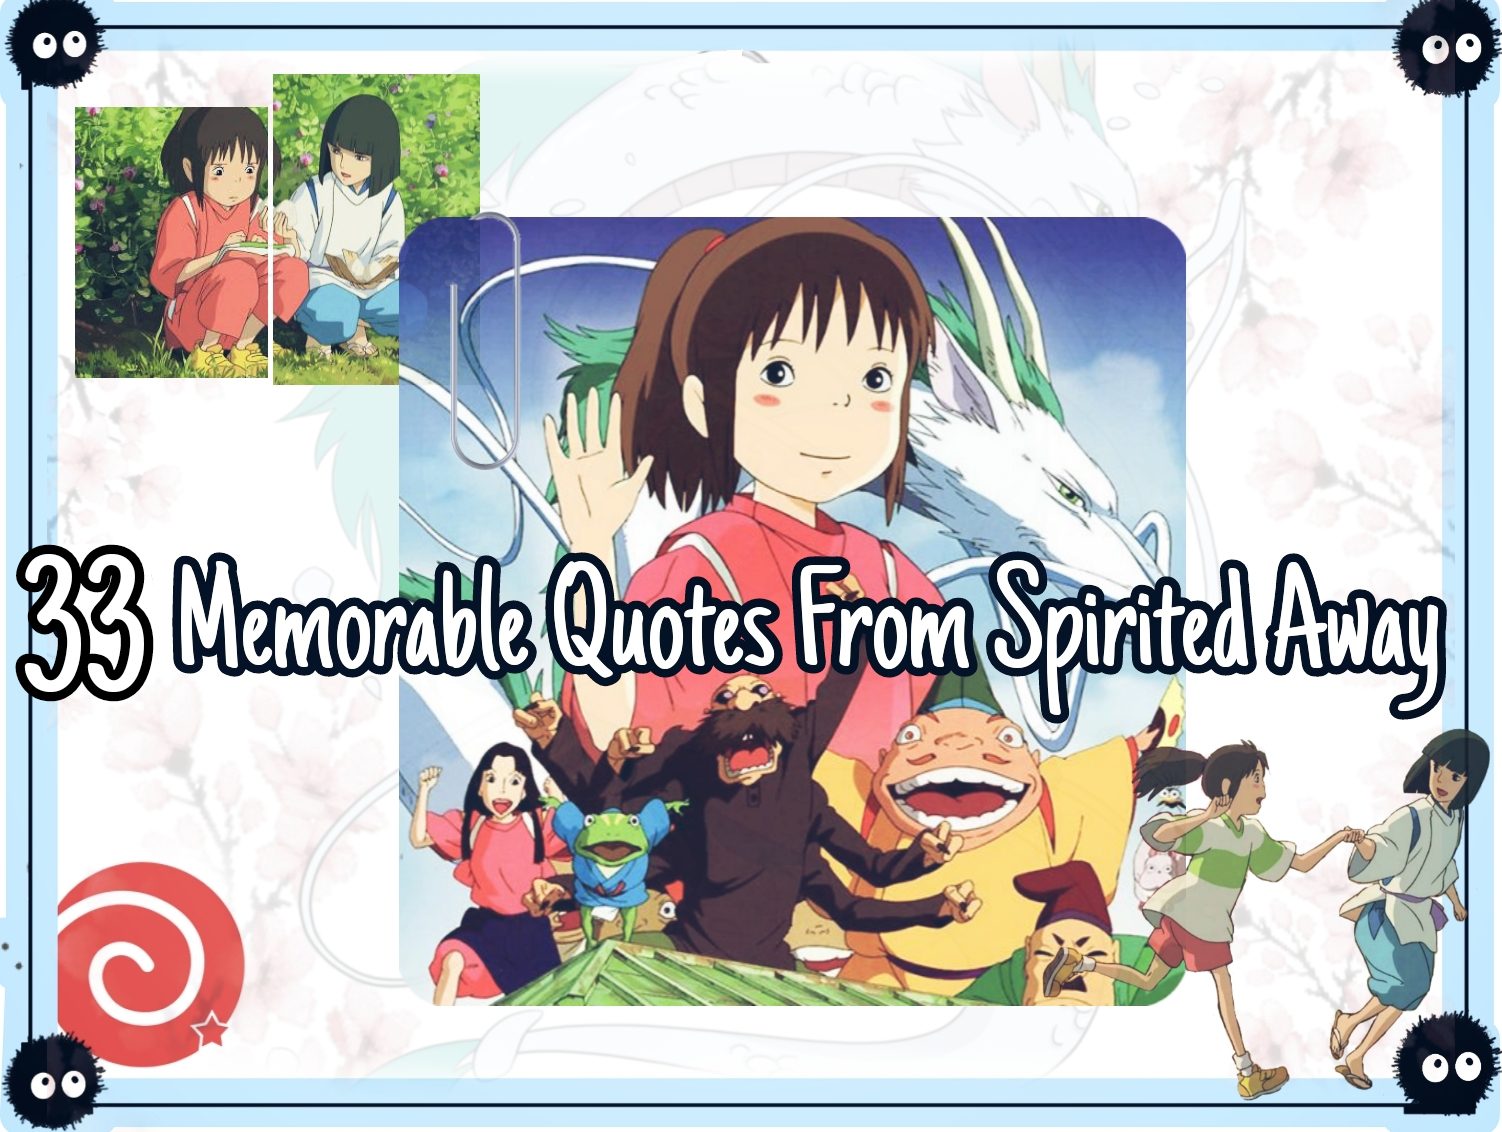 33 most memorable quotes from Spirited Away